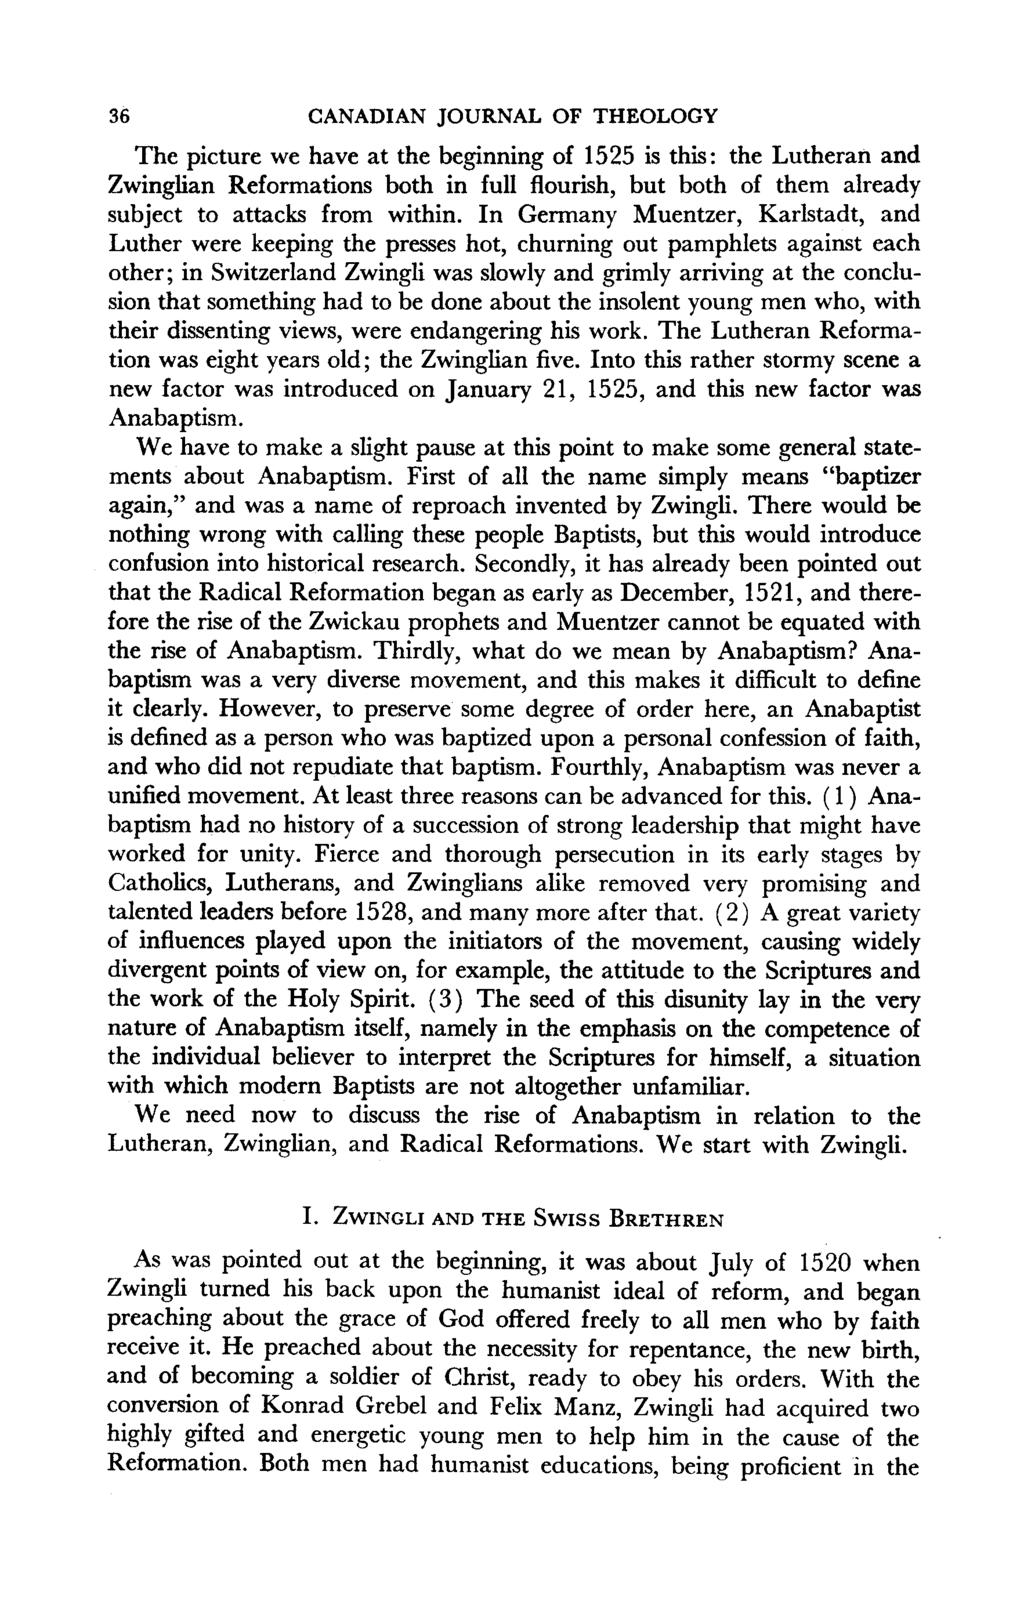 36 CANADIAN JOURNAL OF THEOLOGY The picture we have at the beginning of 1525 is this: the Lutheran and Zwinglian Reformations both in full flourish, but both of them already subject to attacks from